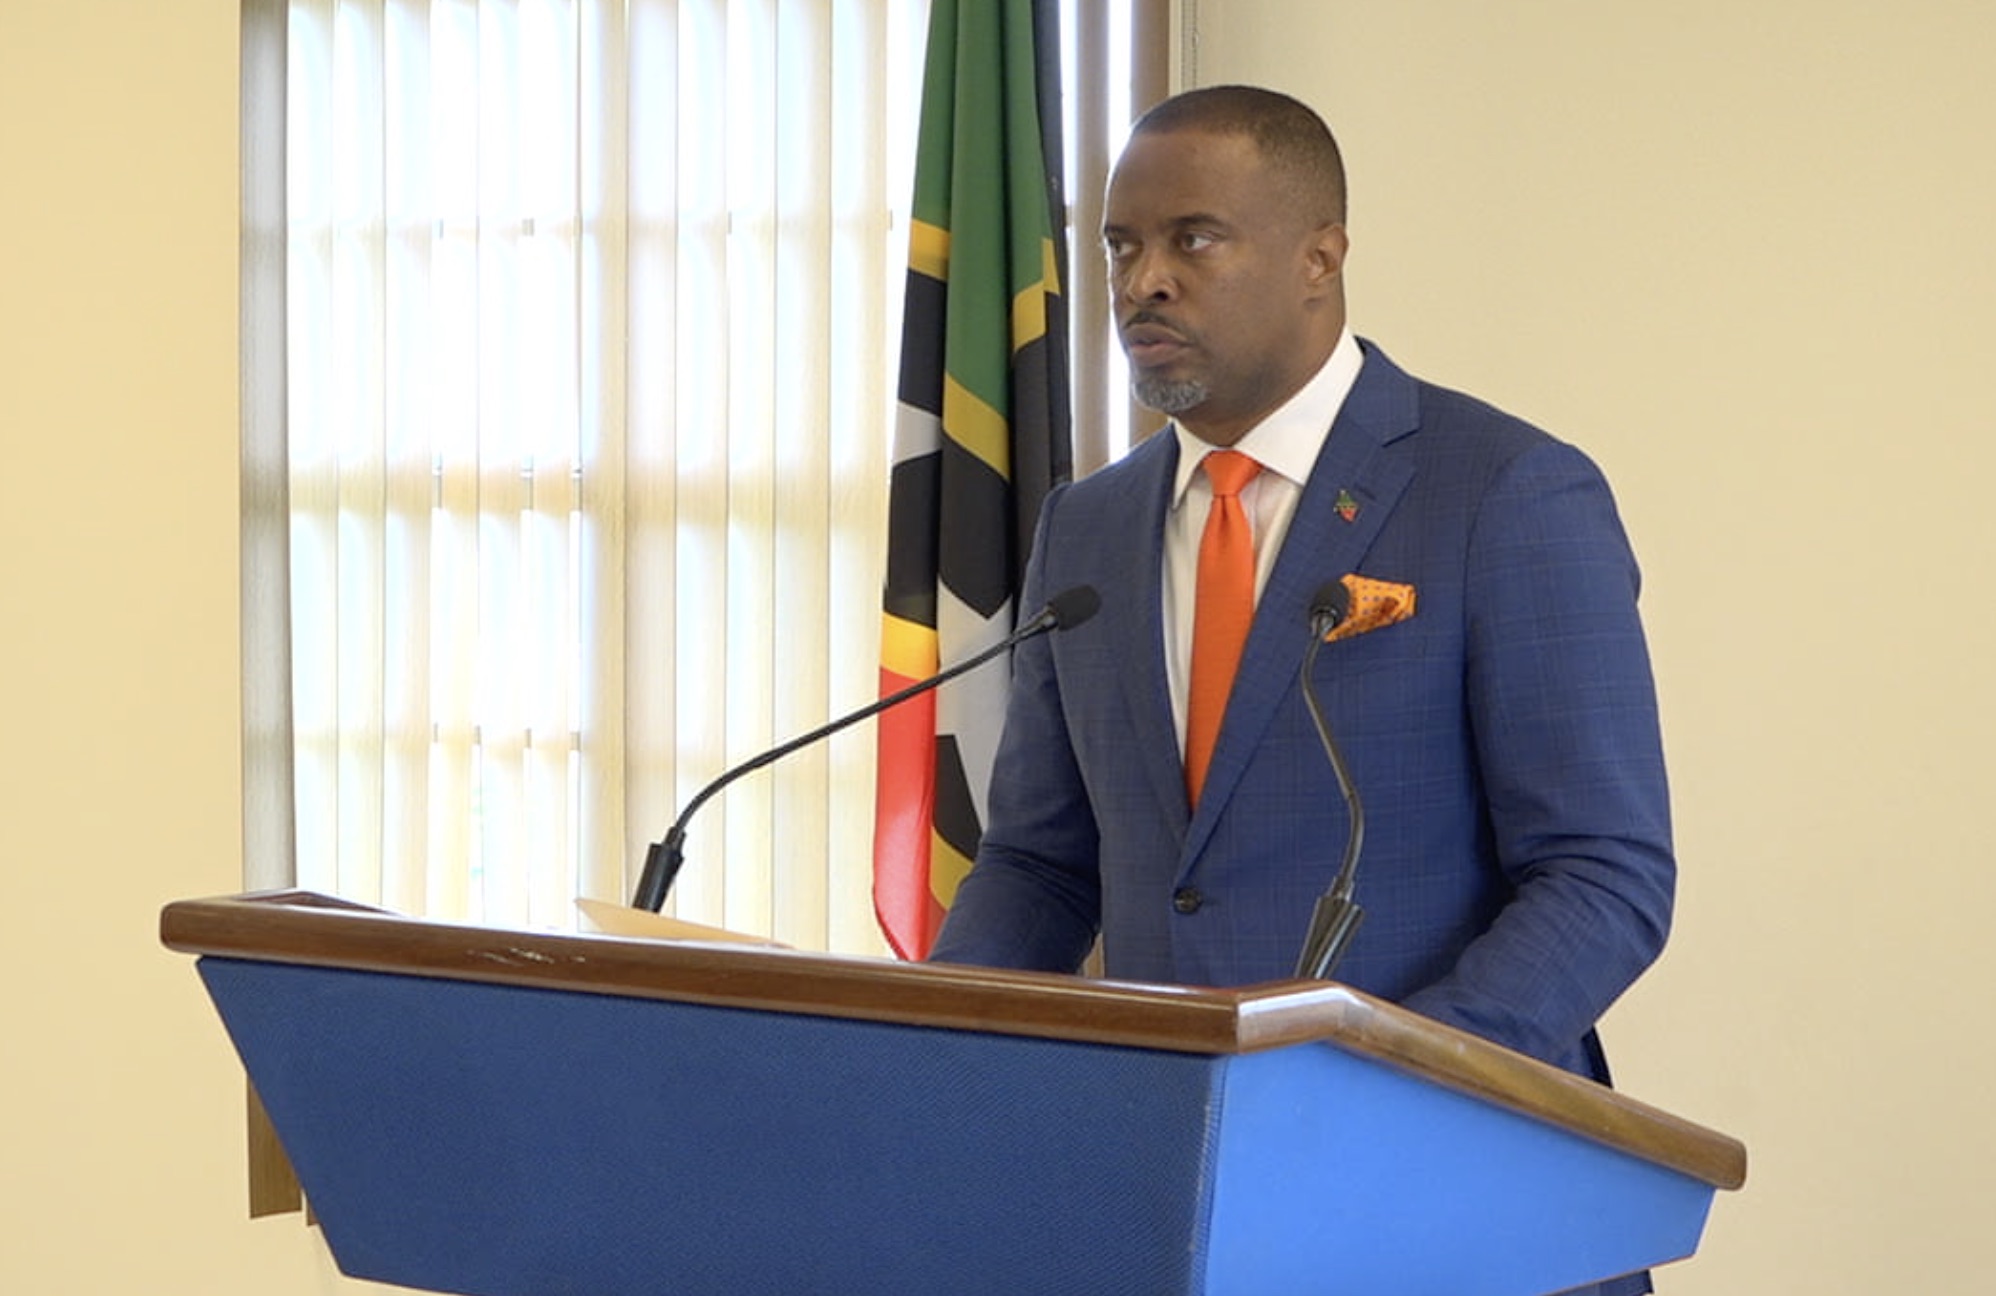 Hon. Mark Brantley, Premier of Nevis and Minister of Health at his recent press conference in Cabinet Room at Pinney’s Estate